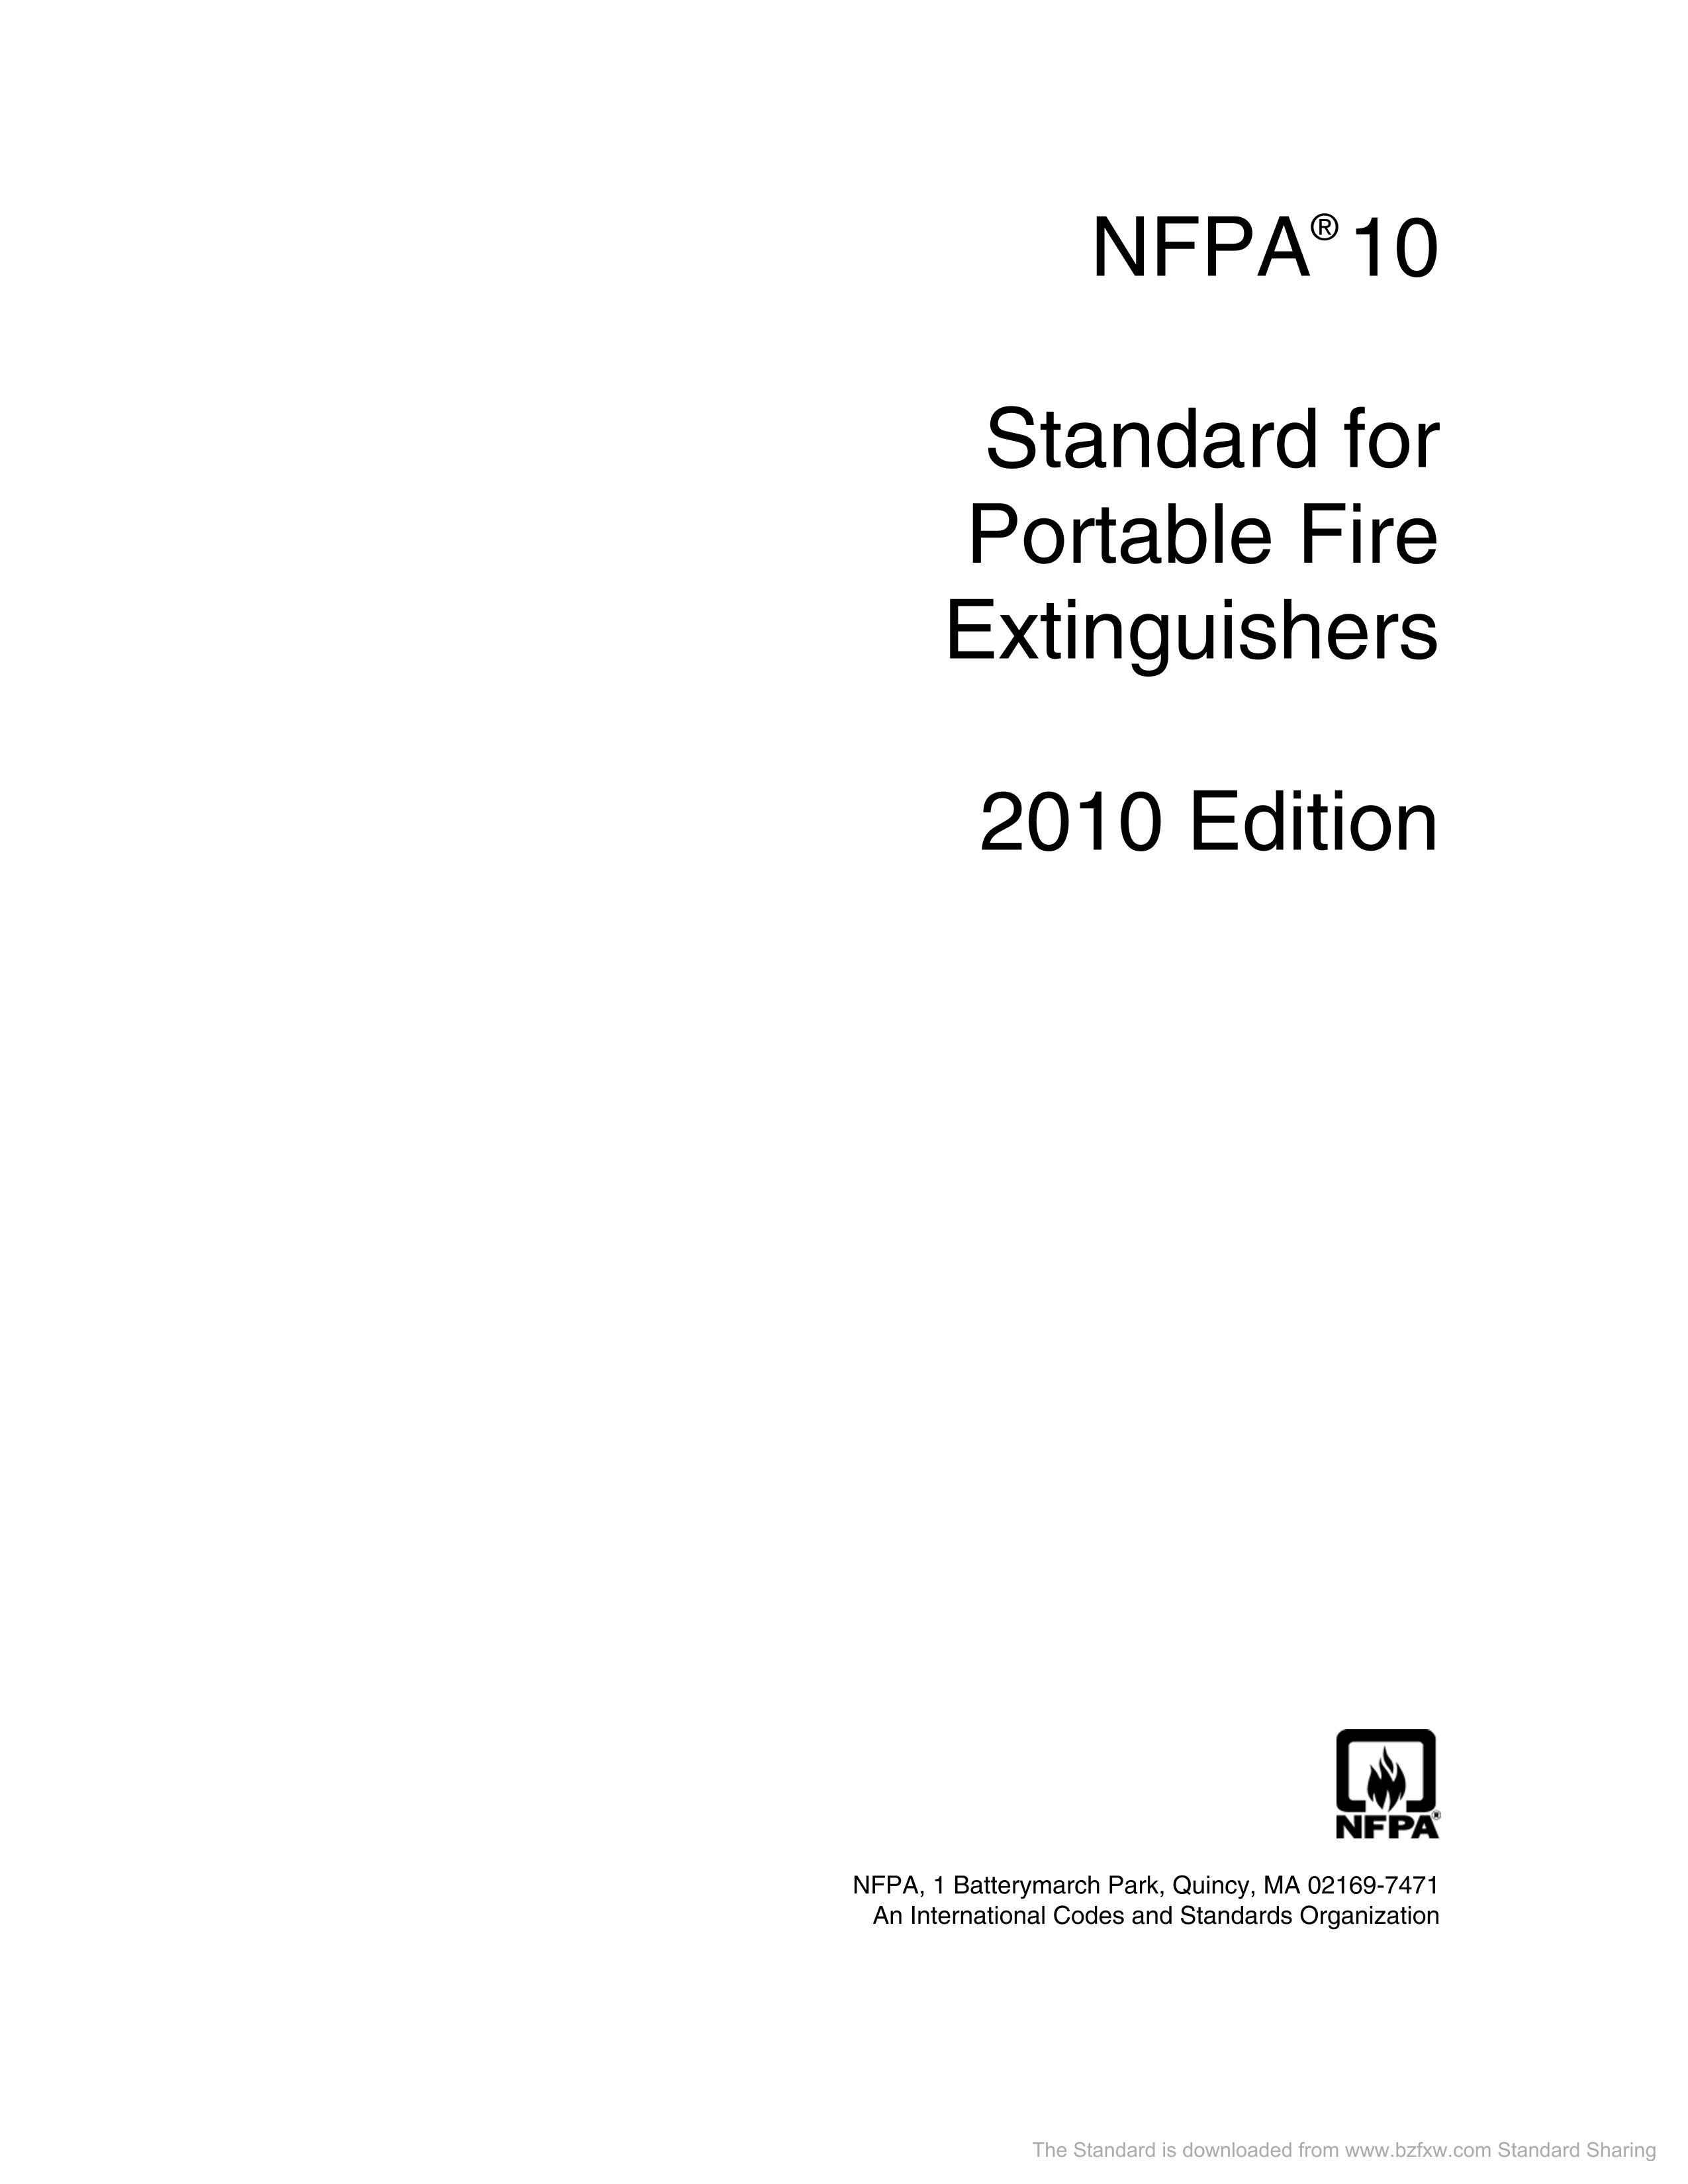 NFPA 10-2010 Standard for Portable Fire Extinguishers .pdf1ҳ